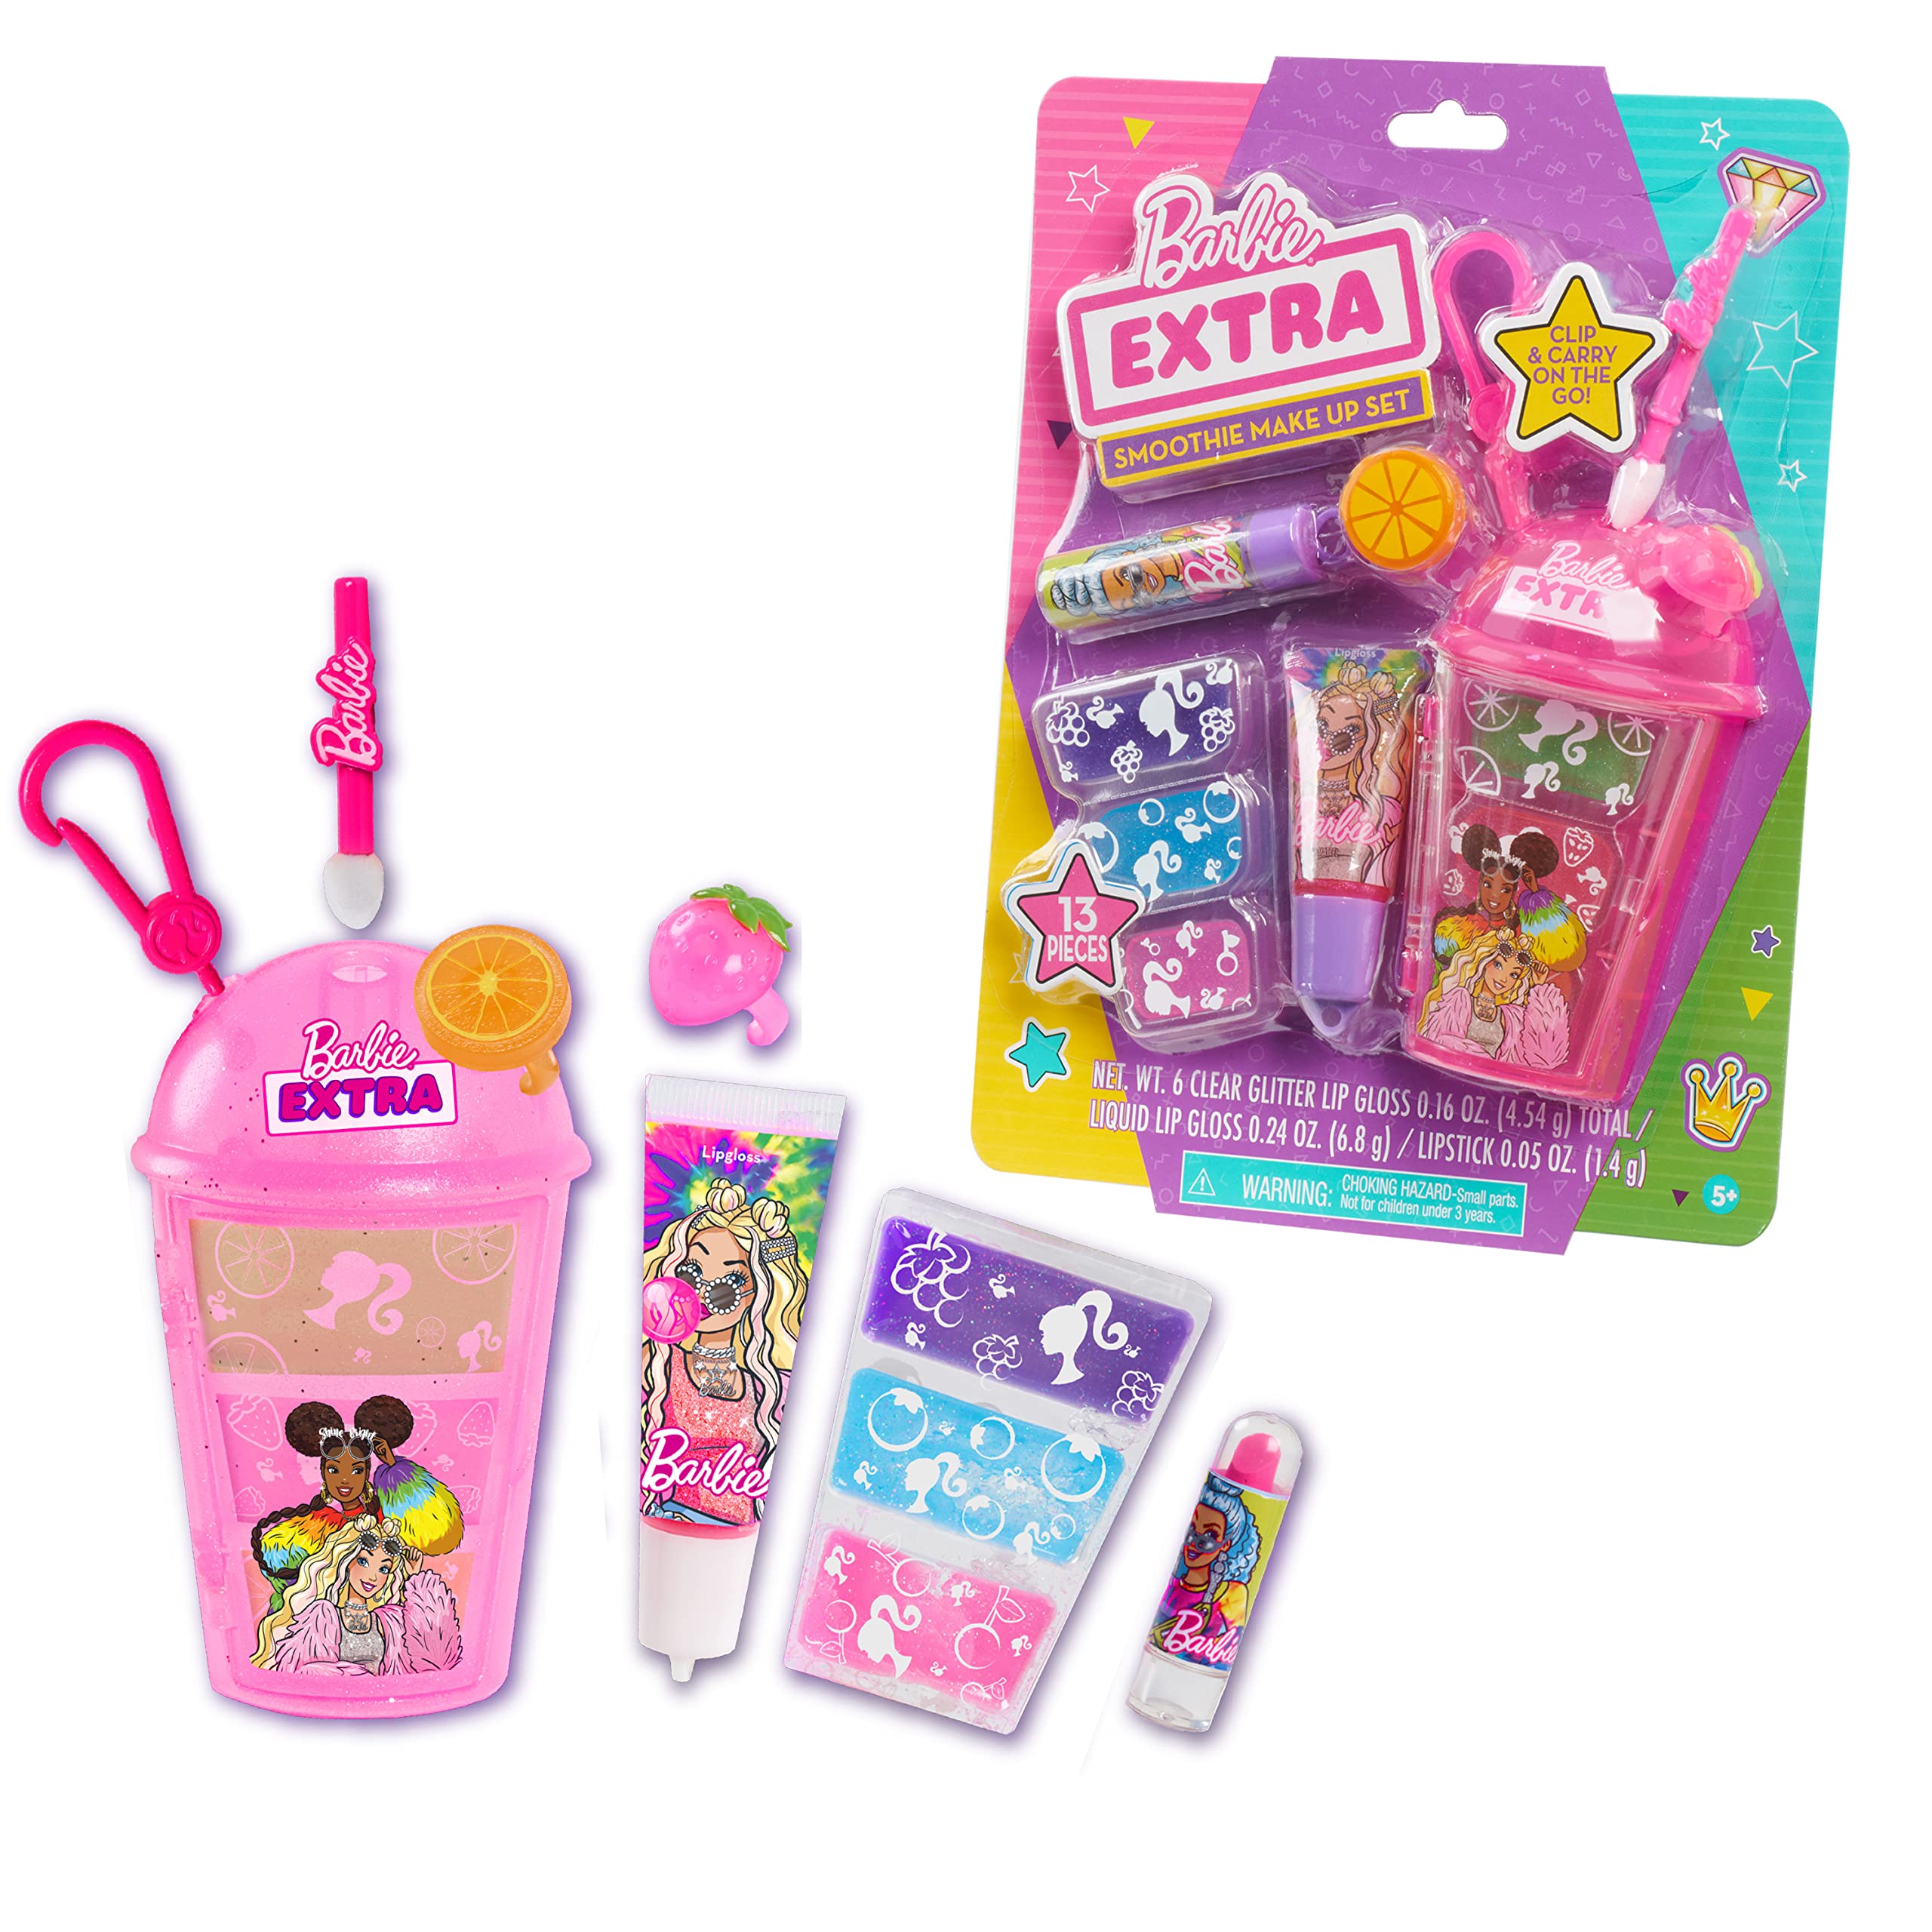 Barbie Extra Smoothie Makeup Set, 13-Piece Dress Up and Pretend Play Set, Kids Toys for Ages 5 Up, Gifts and Presents by Just Play